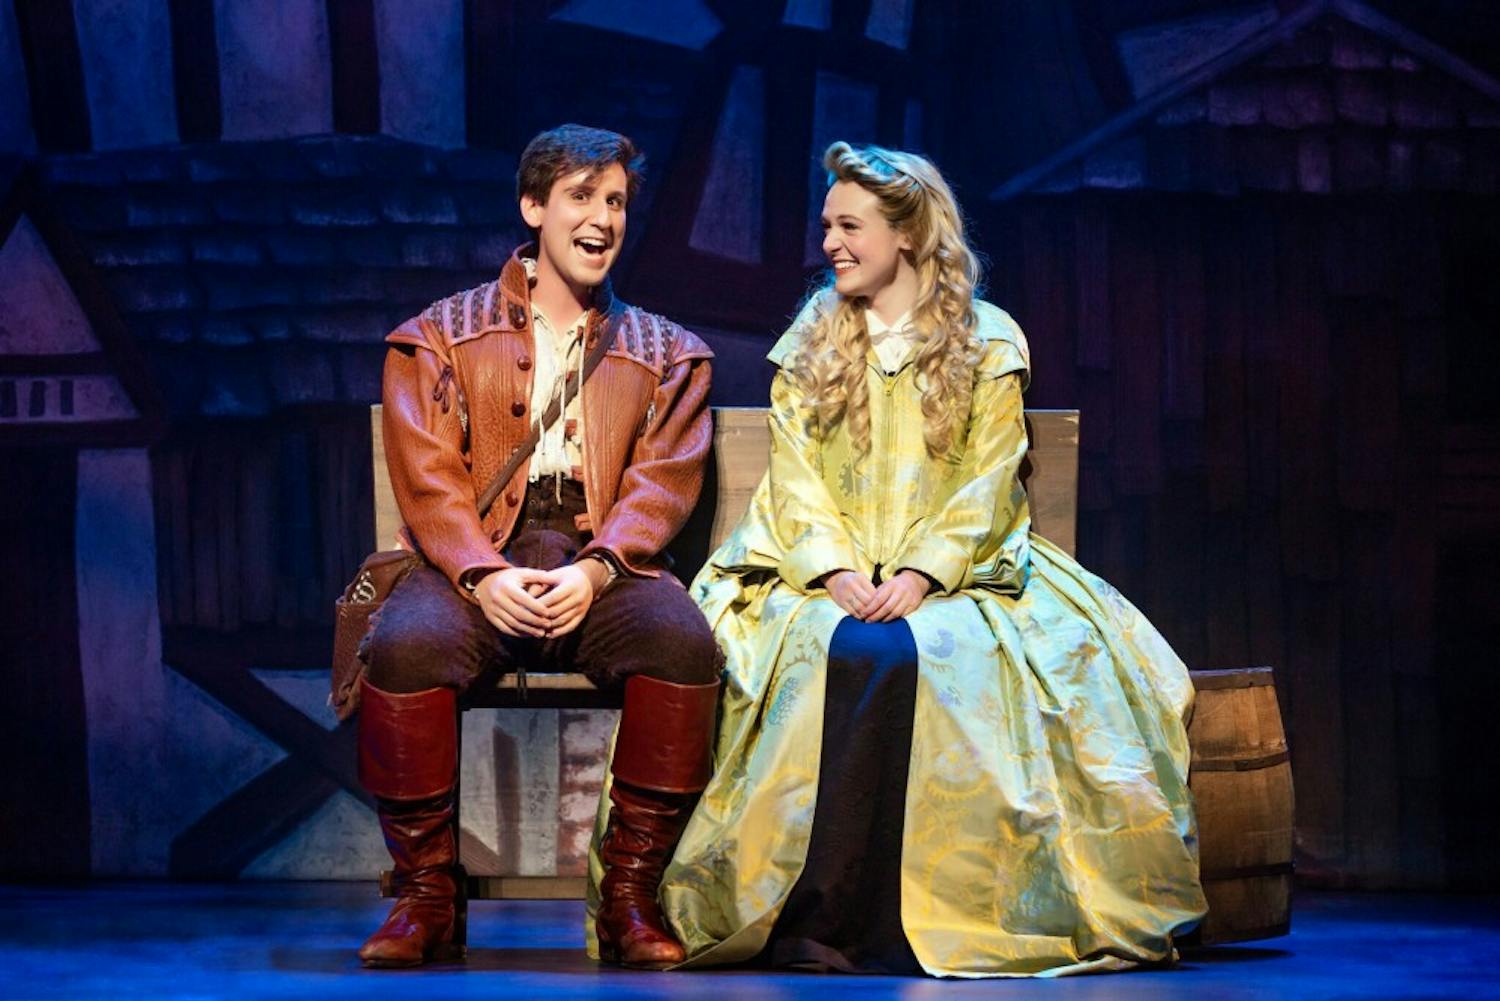 Spitaletta, pictured above with co-star&nbsp;Jennifer Elizabeth Smith, leads the touring cast of the Broadway musical.